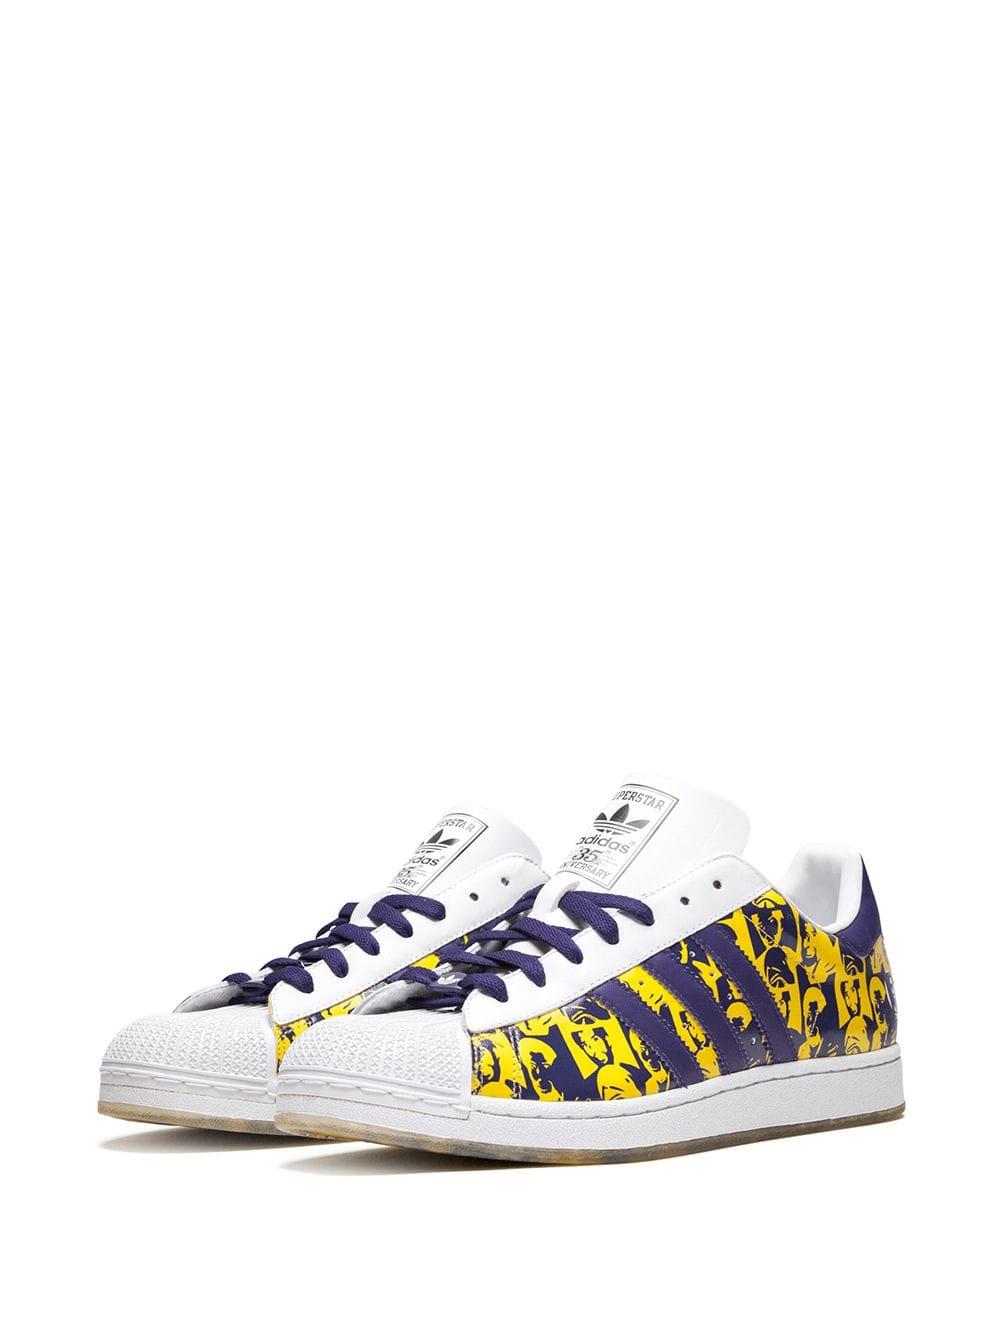 adidas Superstar 1 Express 'andy Warhol' Shoes for Men - Lyst